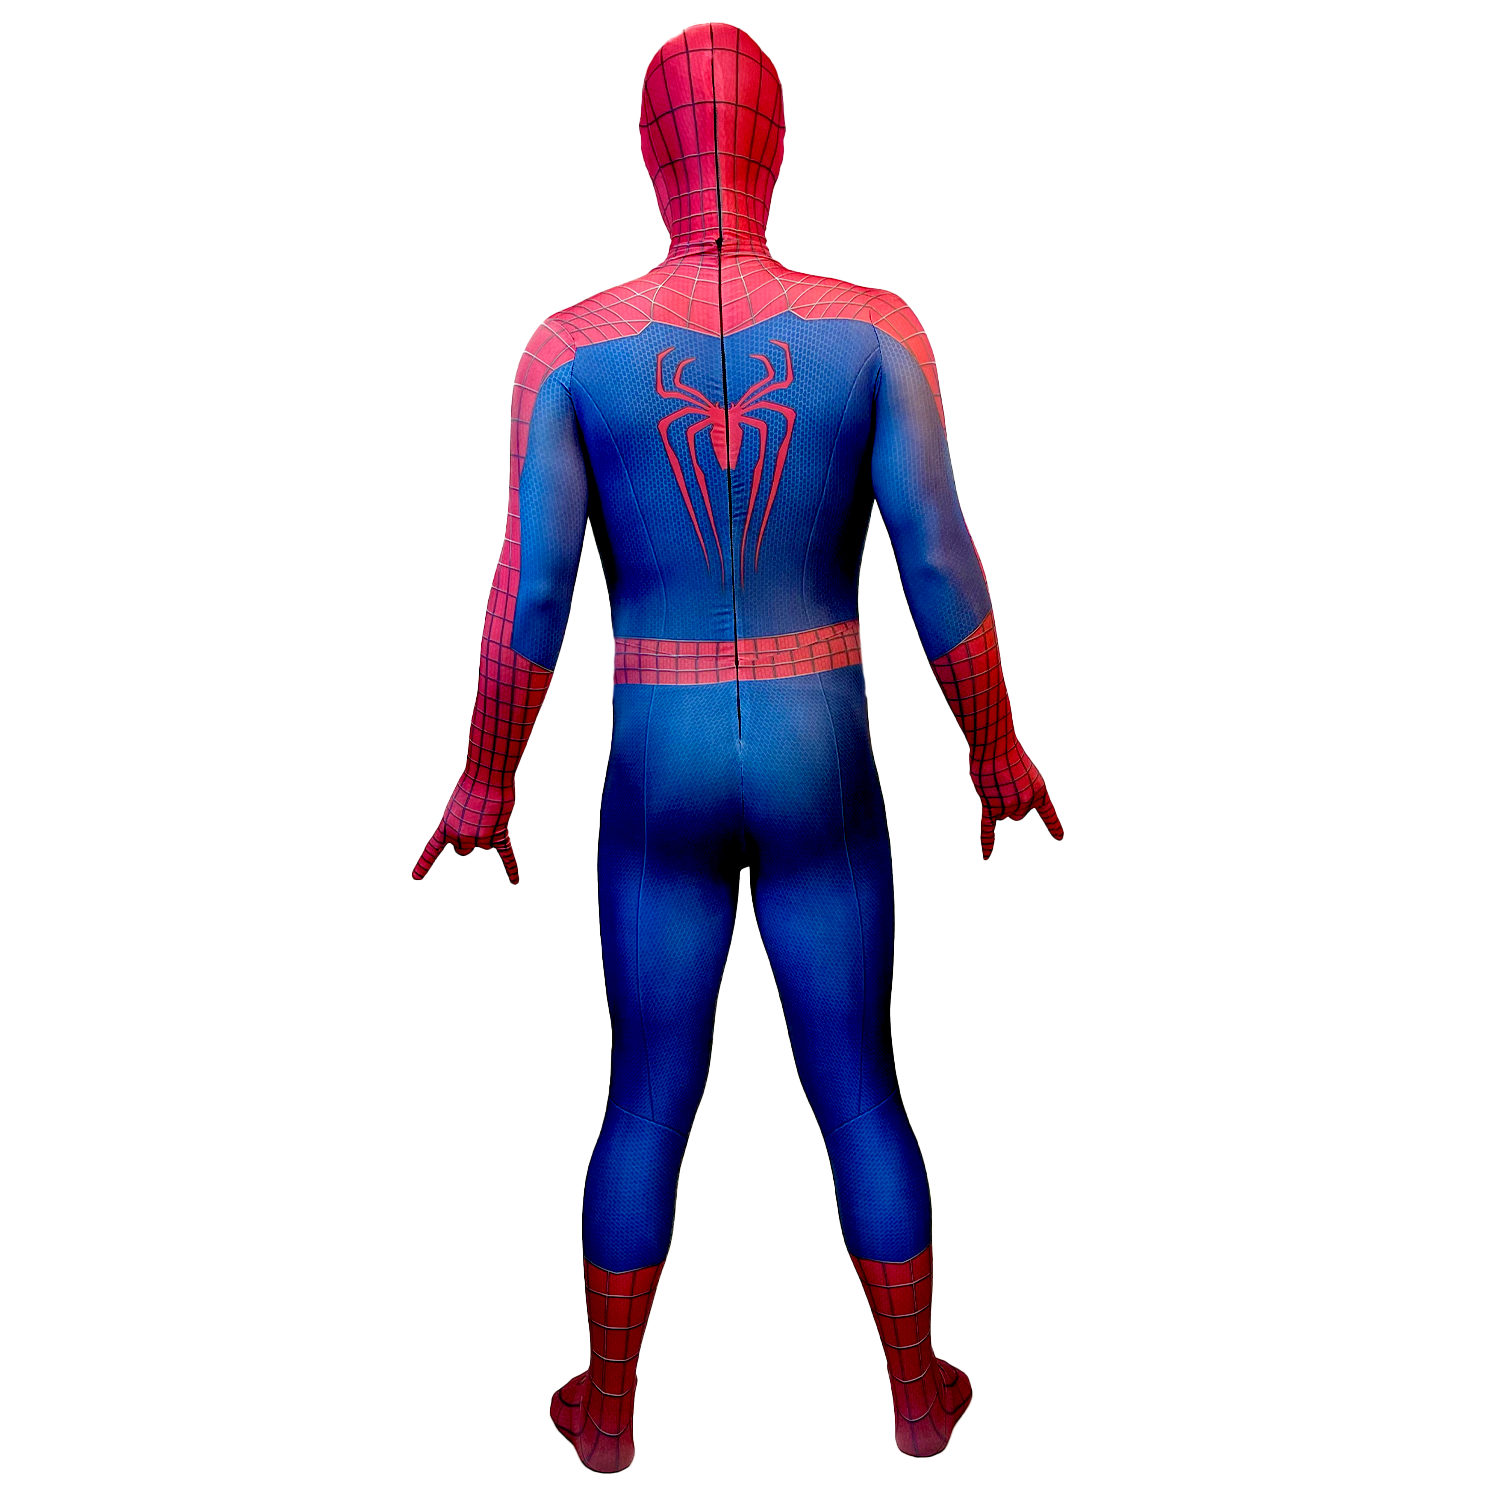 Spider-man Ultimate Cosplay Adult Costume